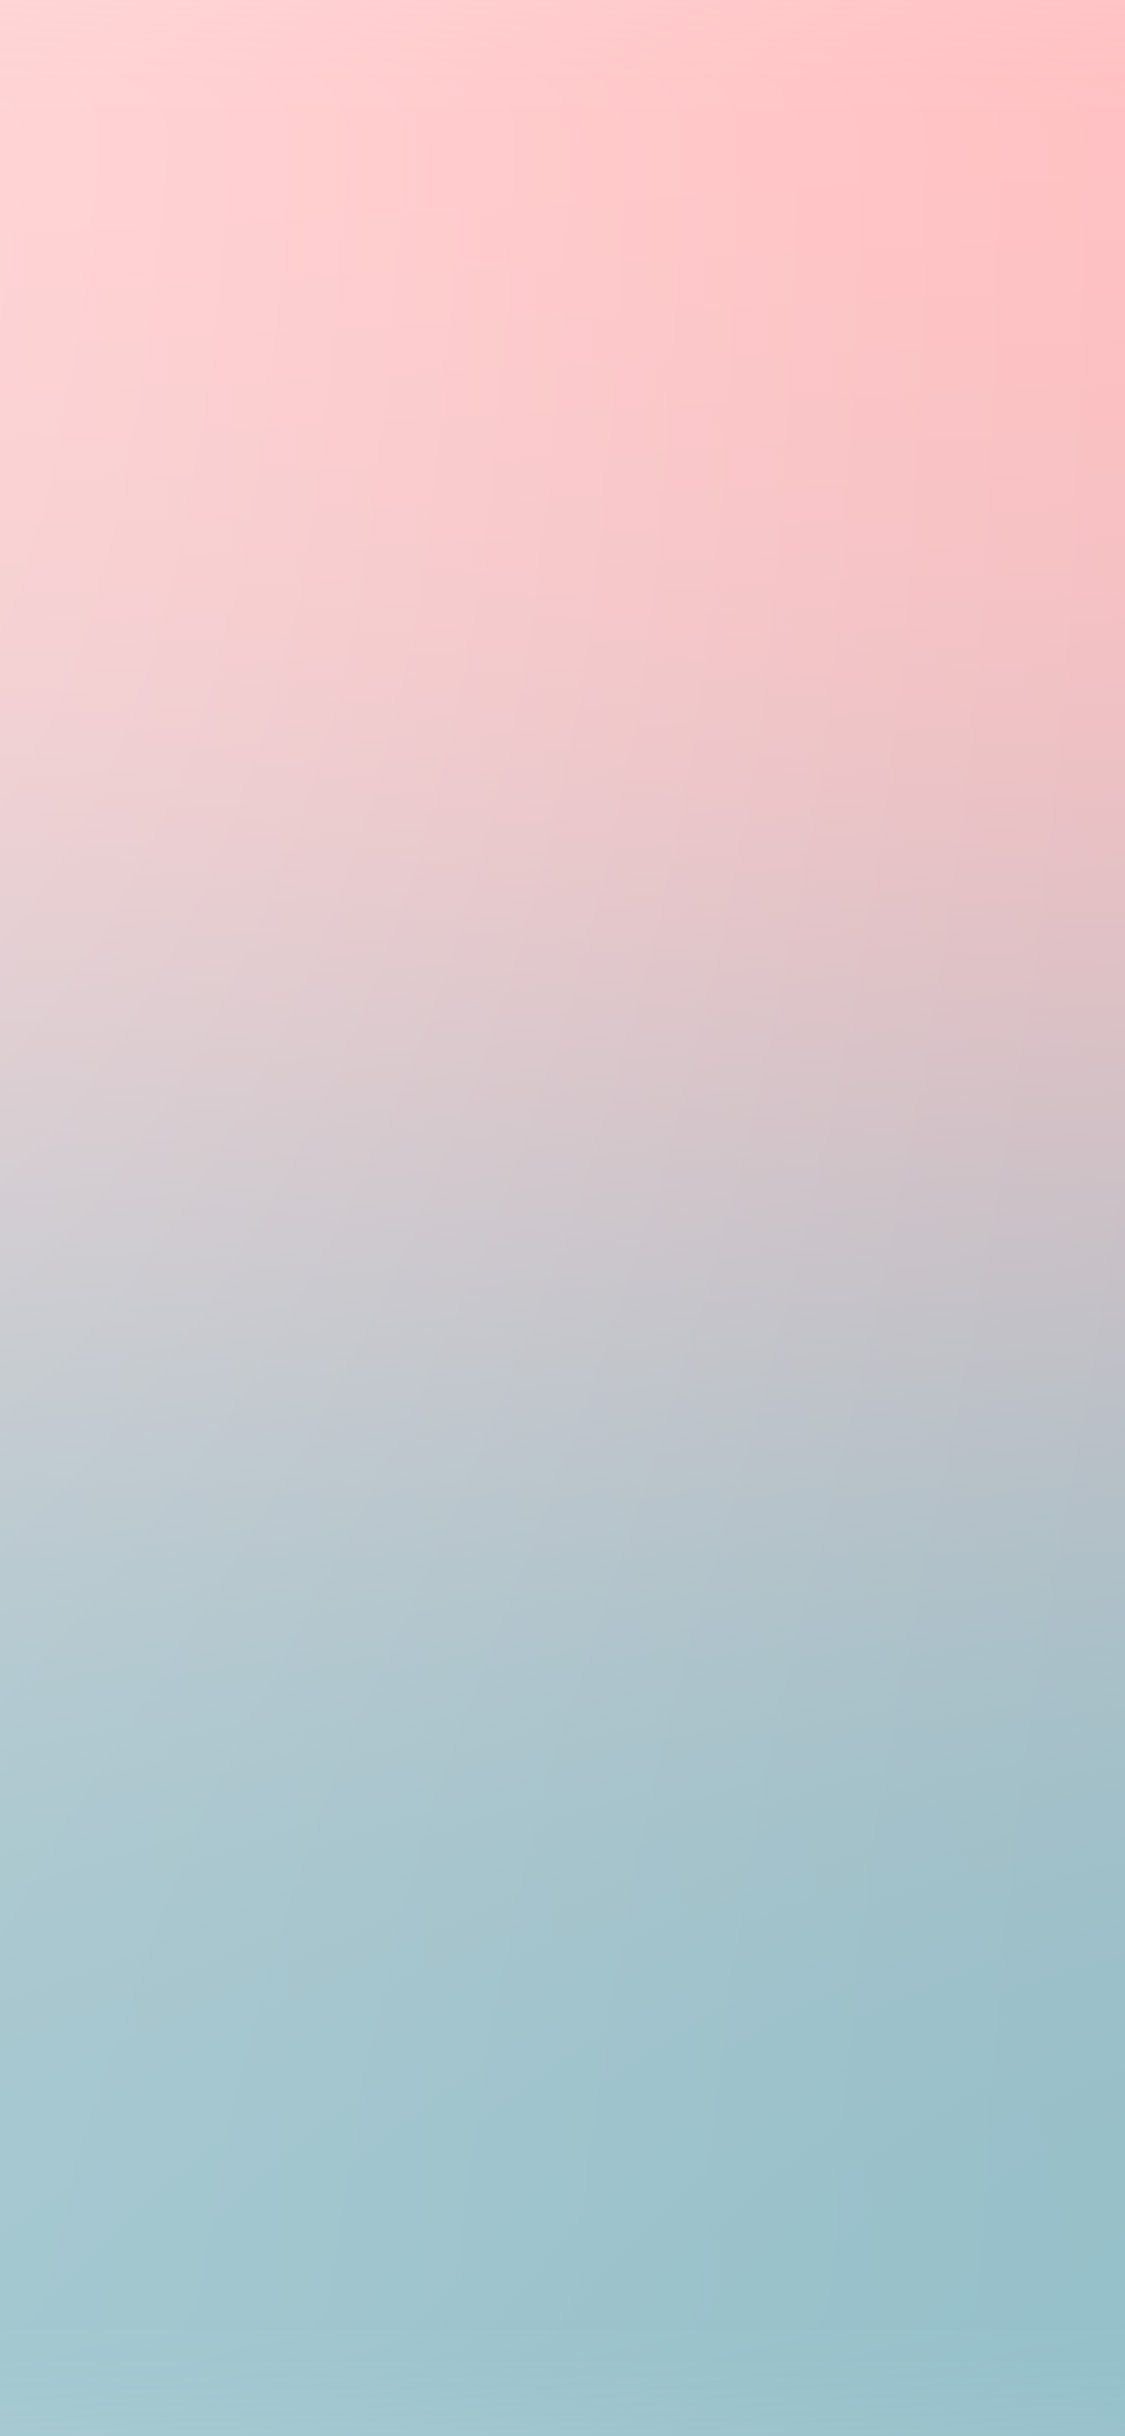 Pink And Blue Iphone Wallpapers